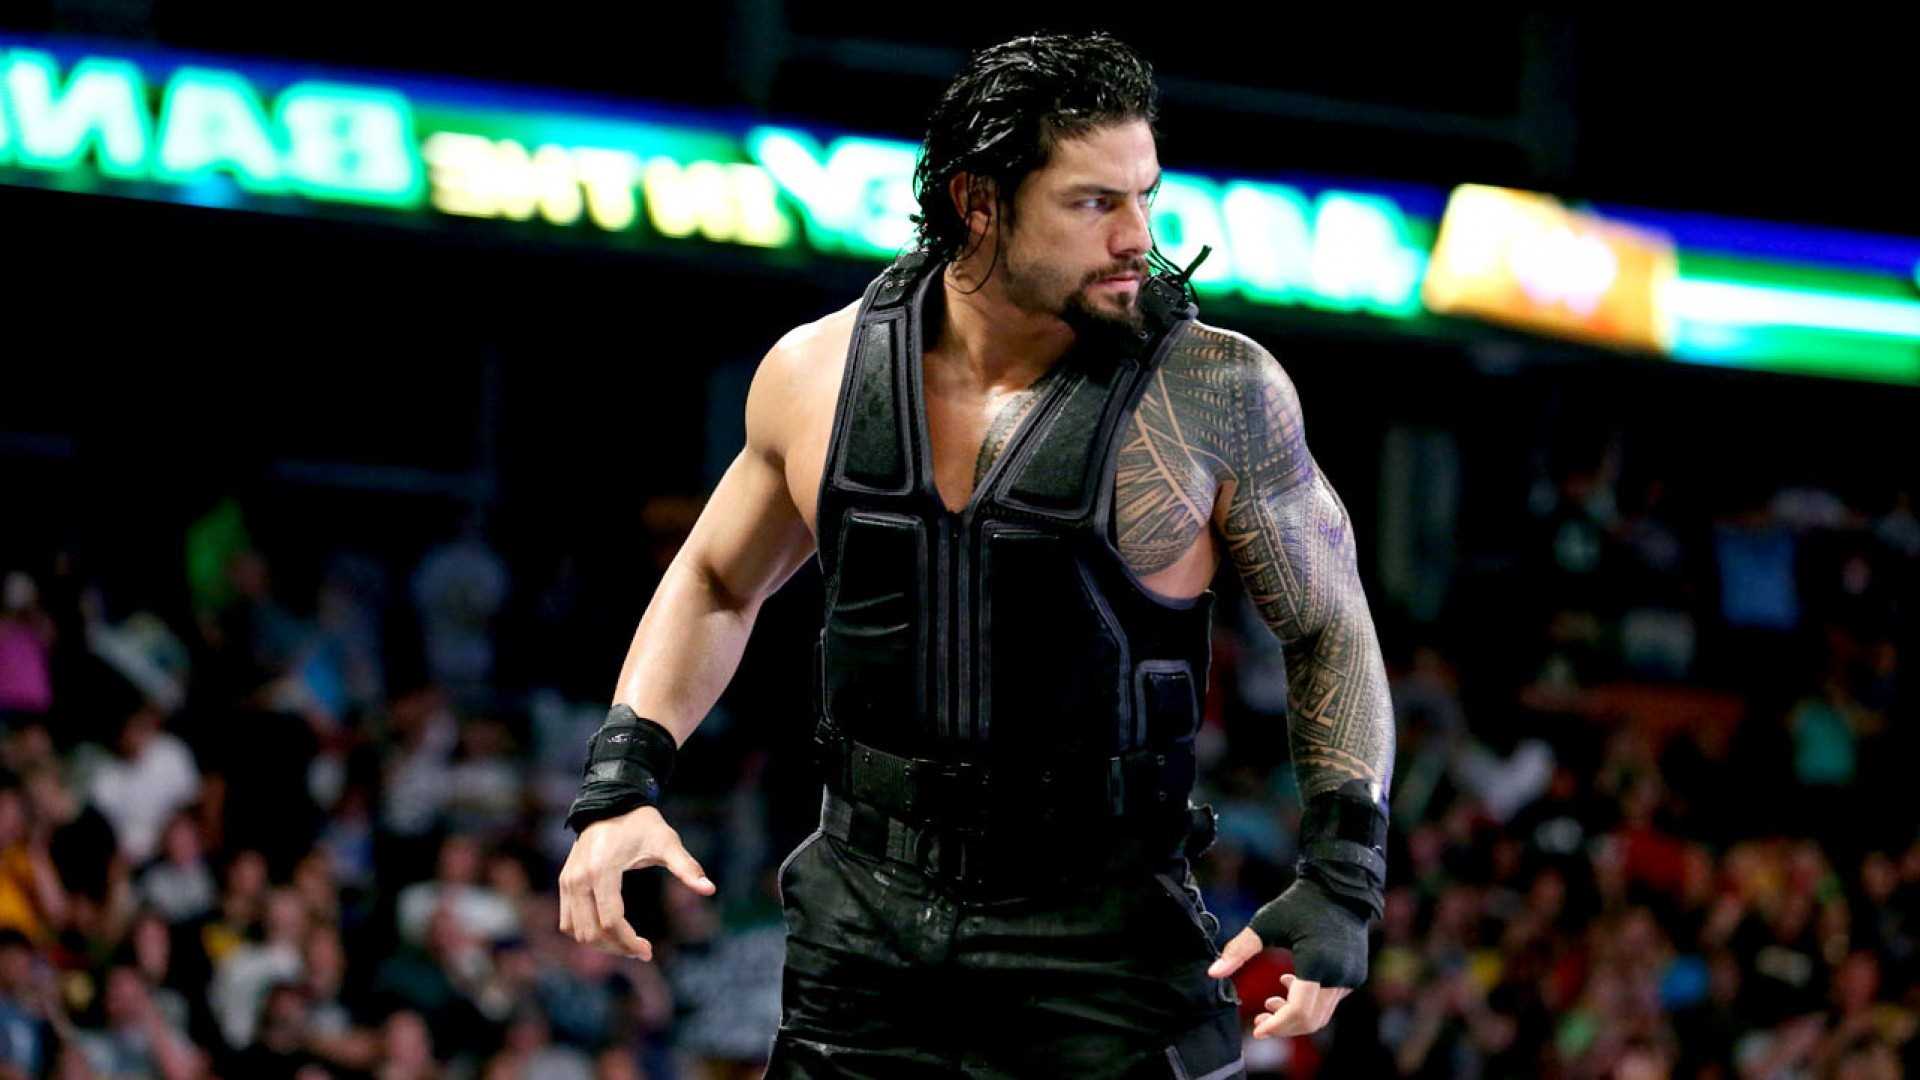 WWE Roman Reigns Wallpaper HD Best Collection Download